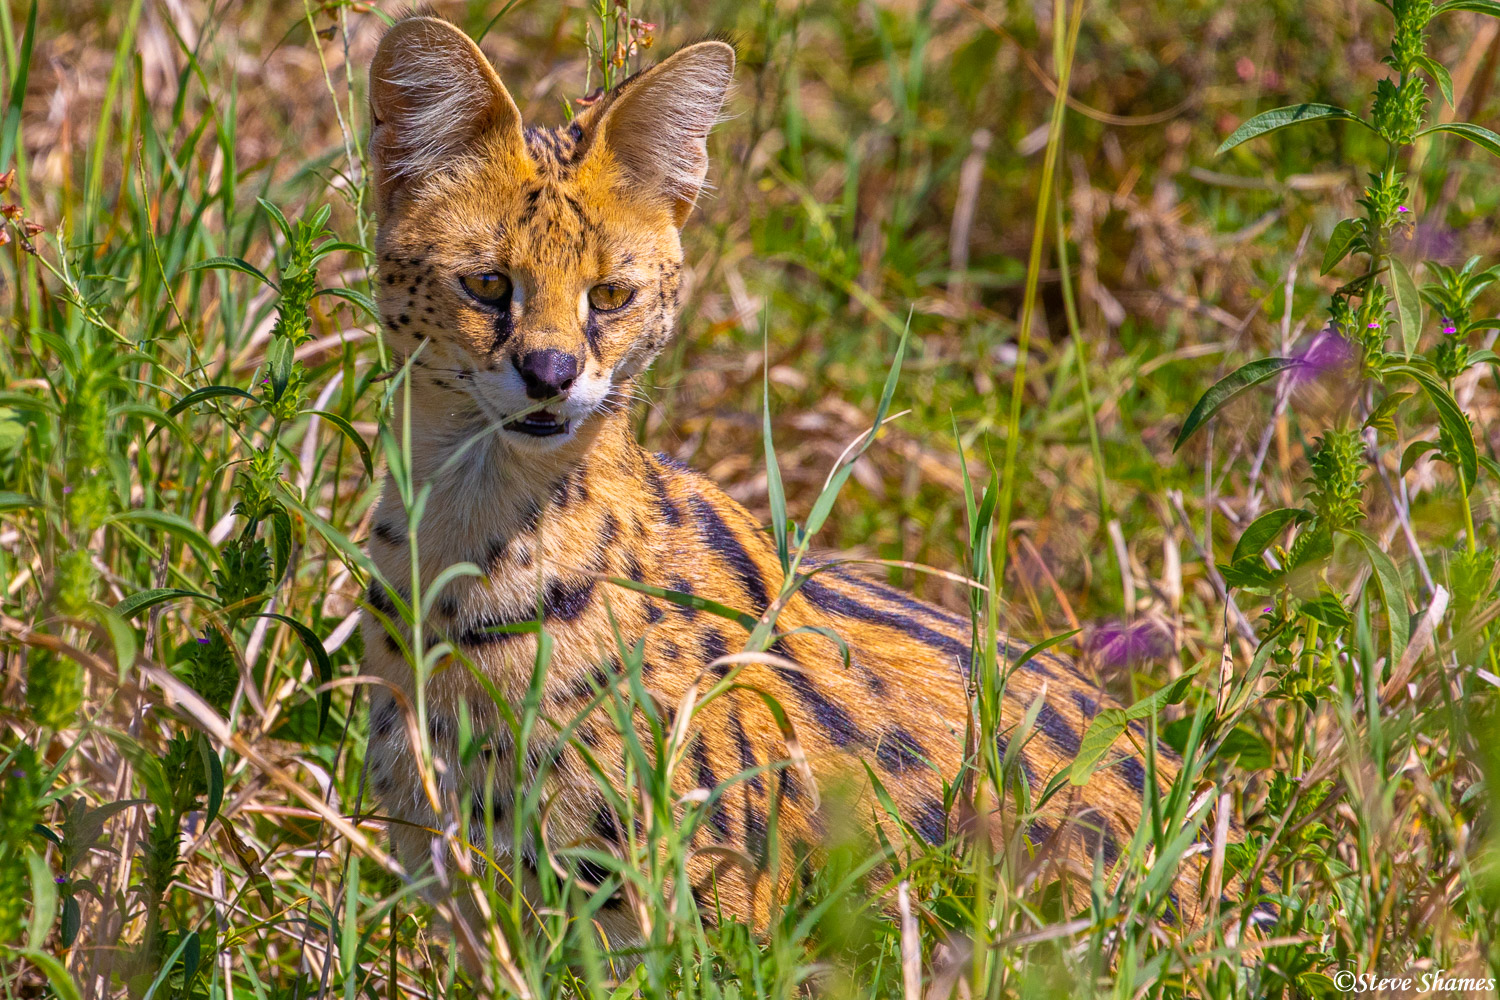 This is the only serval cat I have seen in 6 trips to Africa. They usually are not out during the day.